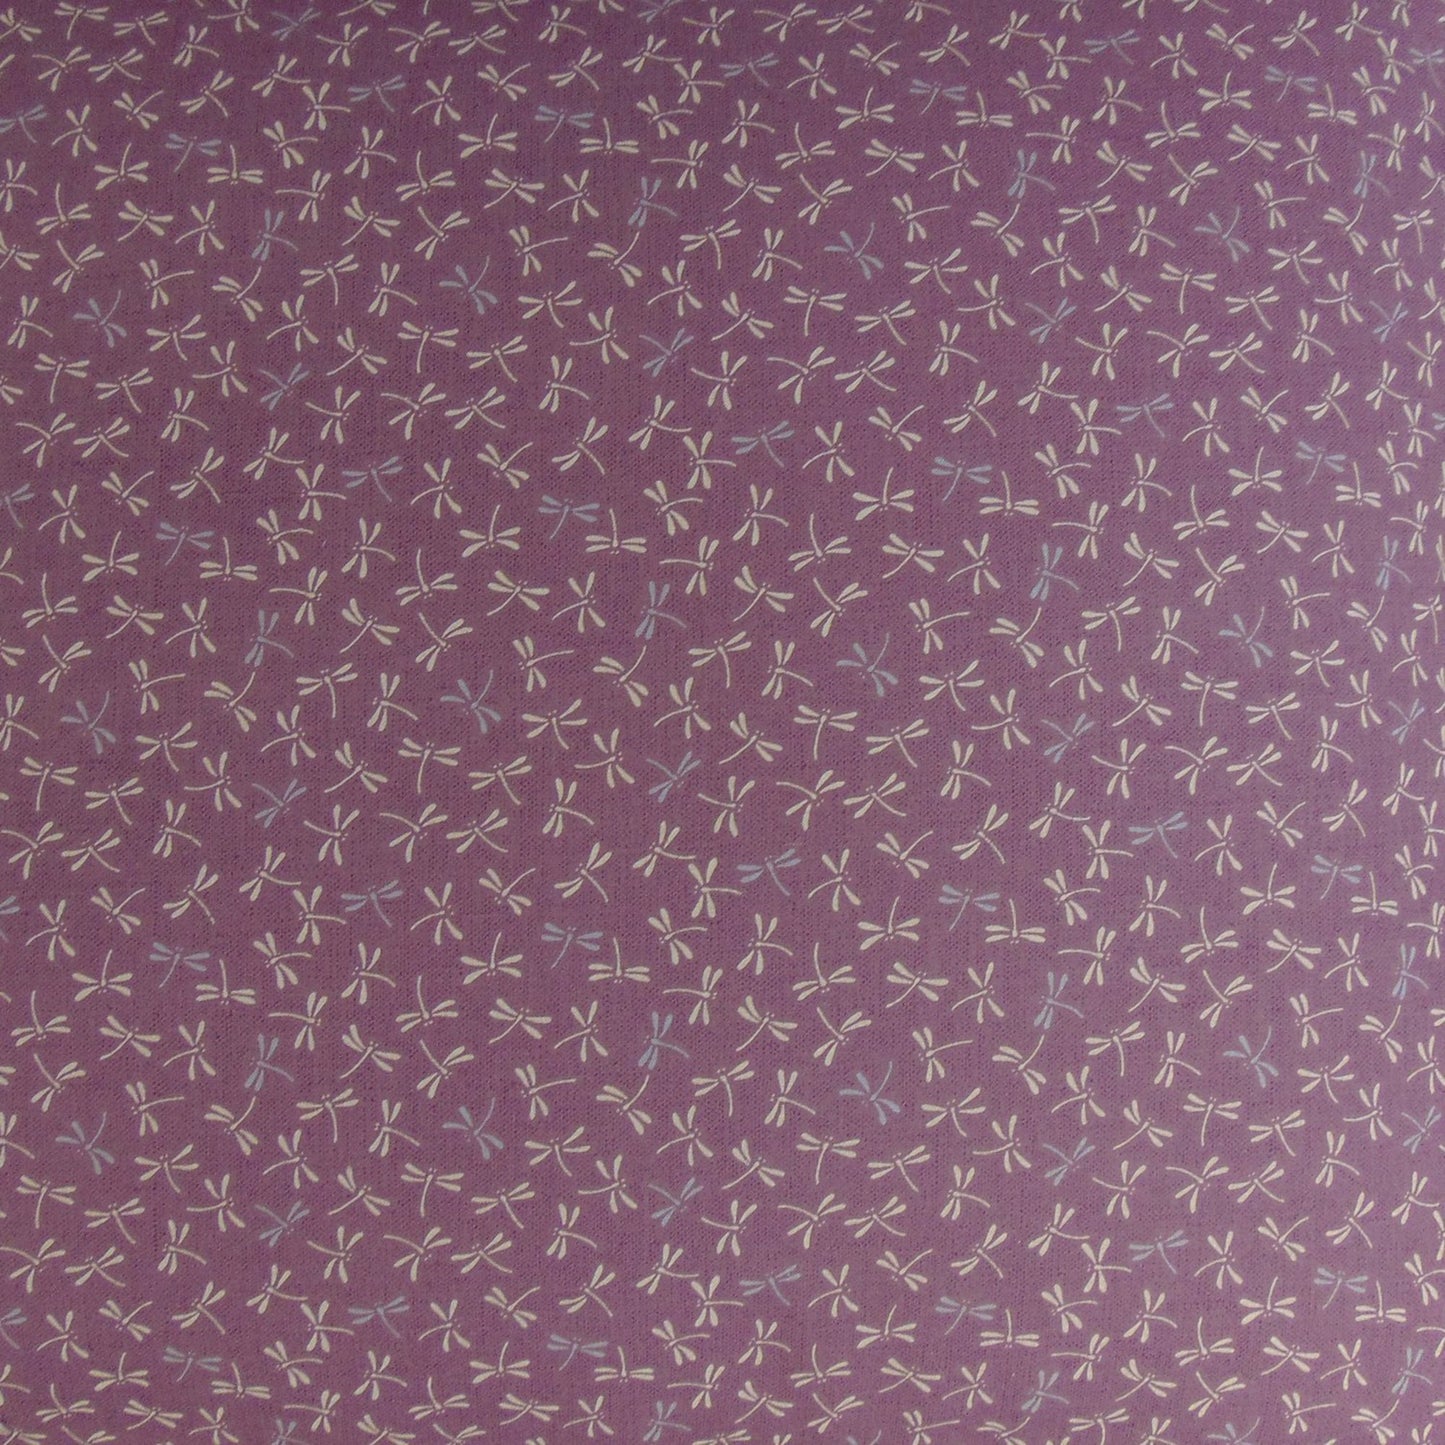 Imported Japanese Fabric - Tombo Purple_Fabric_Imported from Japan_100% Cotton_Japanese Sleep System